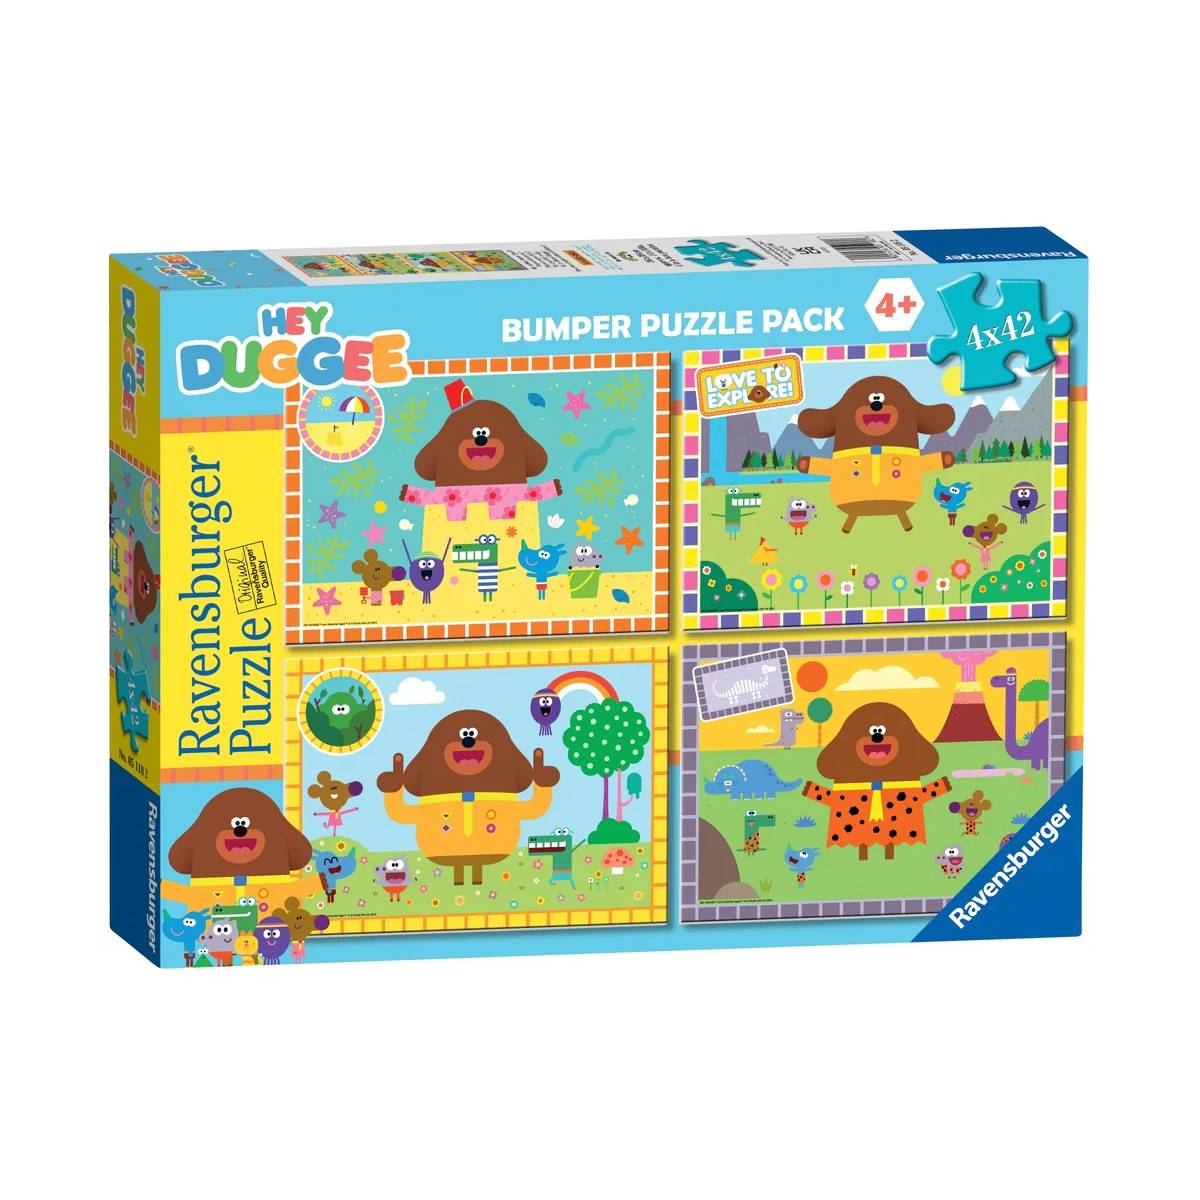 RAVENSBURGER HEY DUGGEE 4 IN 1 LETS GO EXPLORE PUZZLE